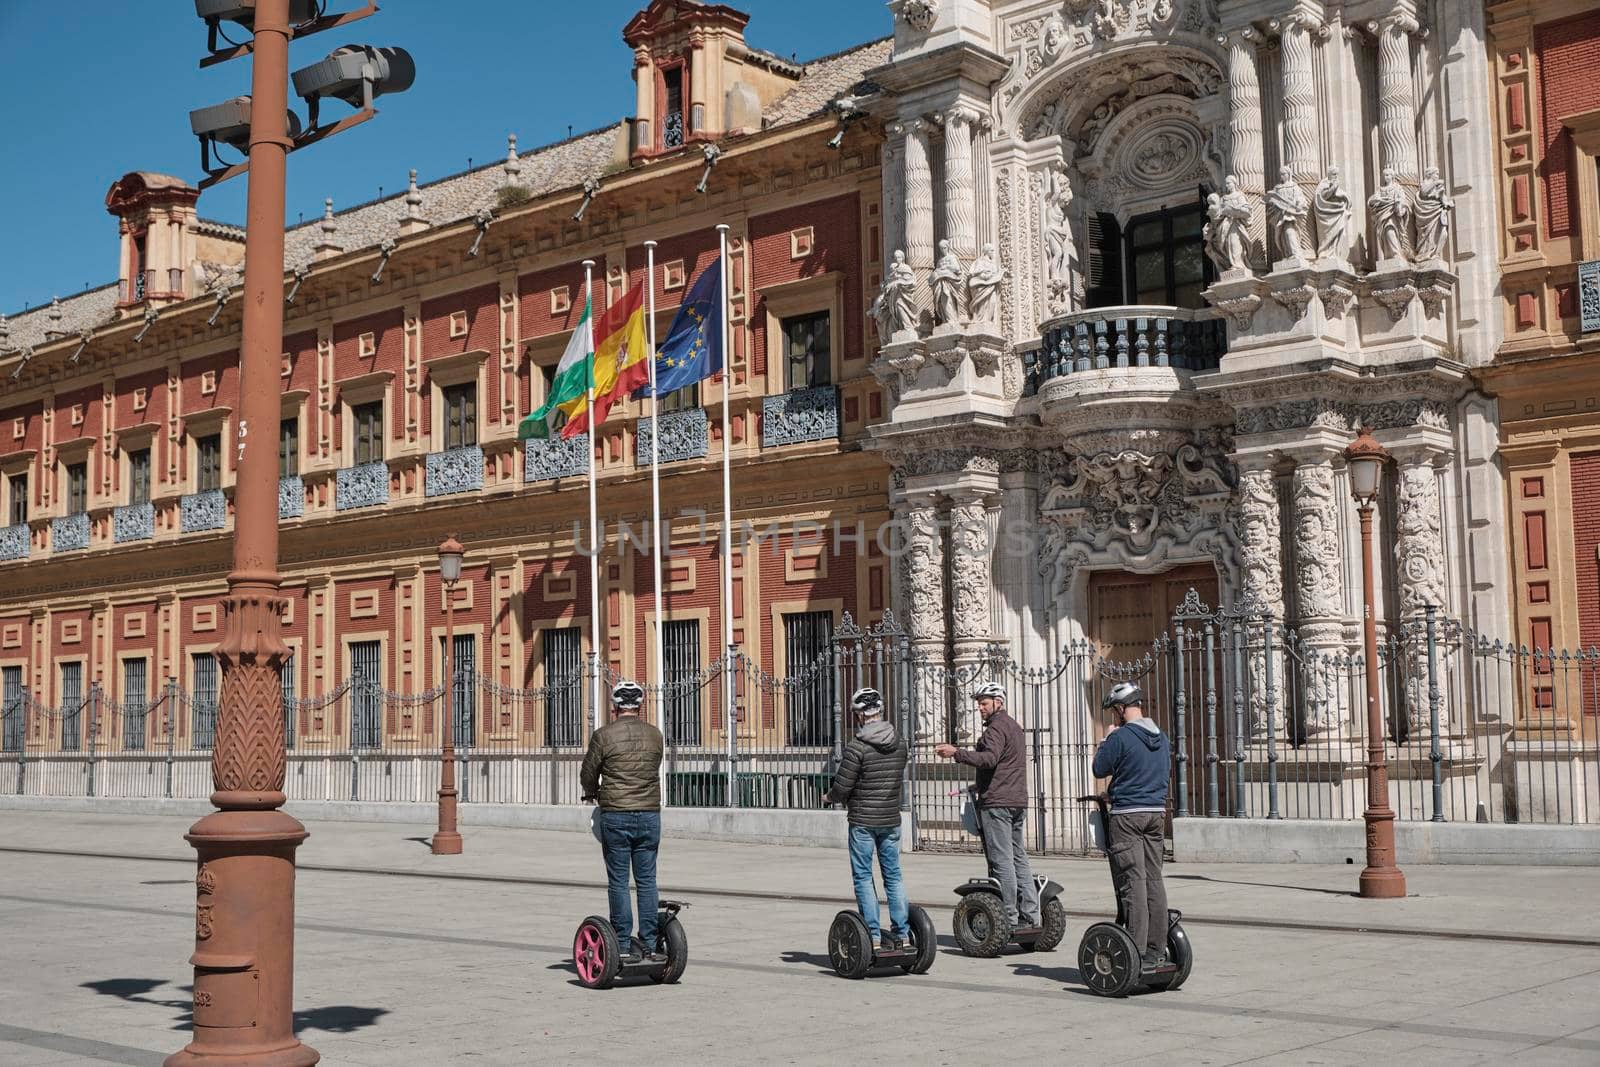 April 2019 - peoples on scooter electric skateboard intelligent hoverboard alternative way if visiting the city and view of San Telmo Palace, Seville, Spain. Seat of the presidency in a sunny day